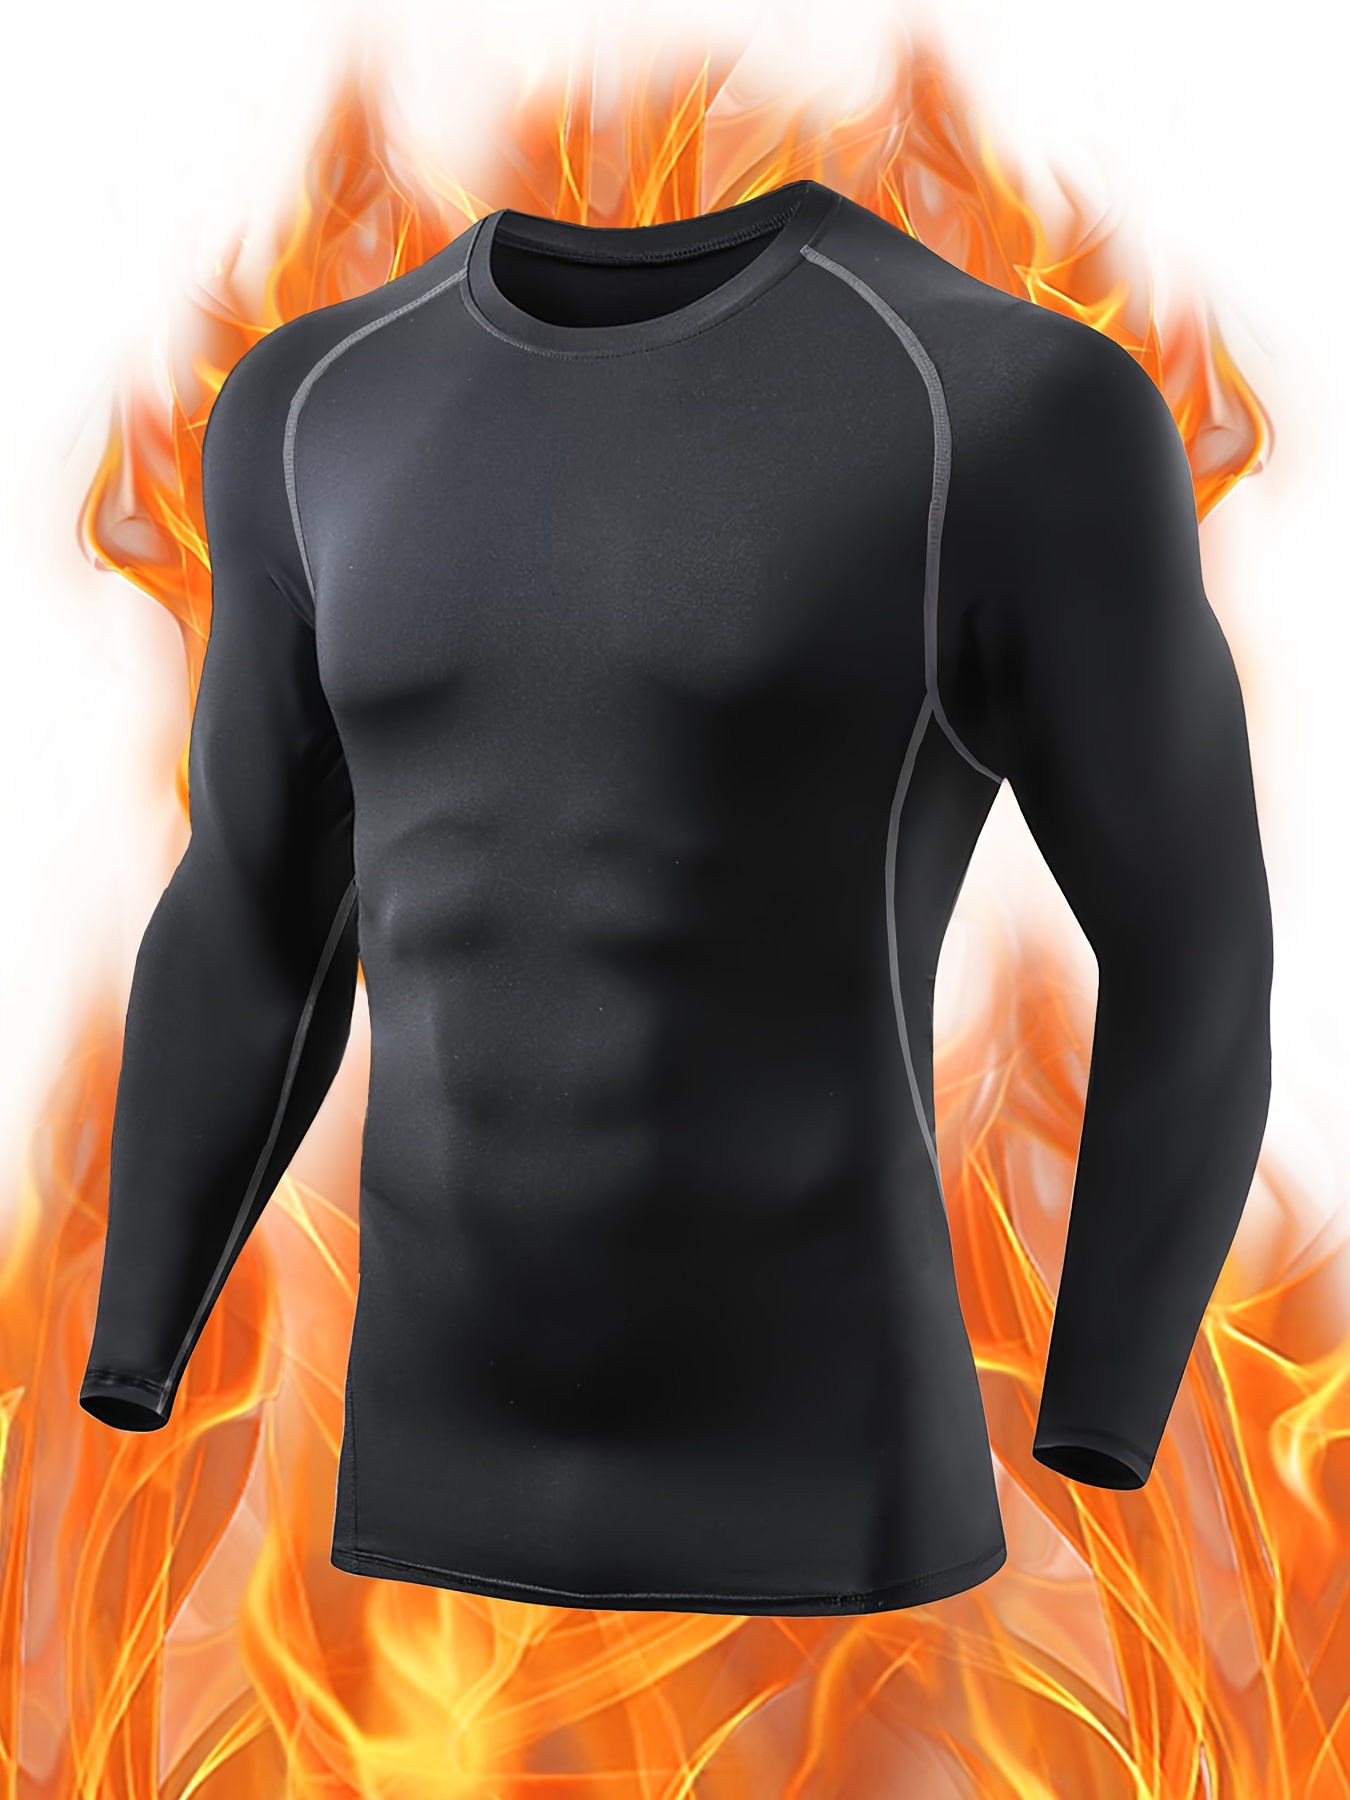 Men's Thermal Suit: Stay Warm & Fit in Style with Fleece Fitness Clothing!